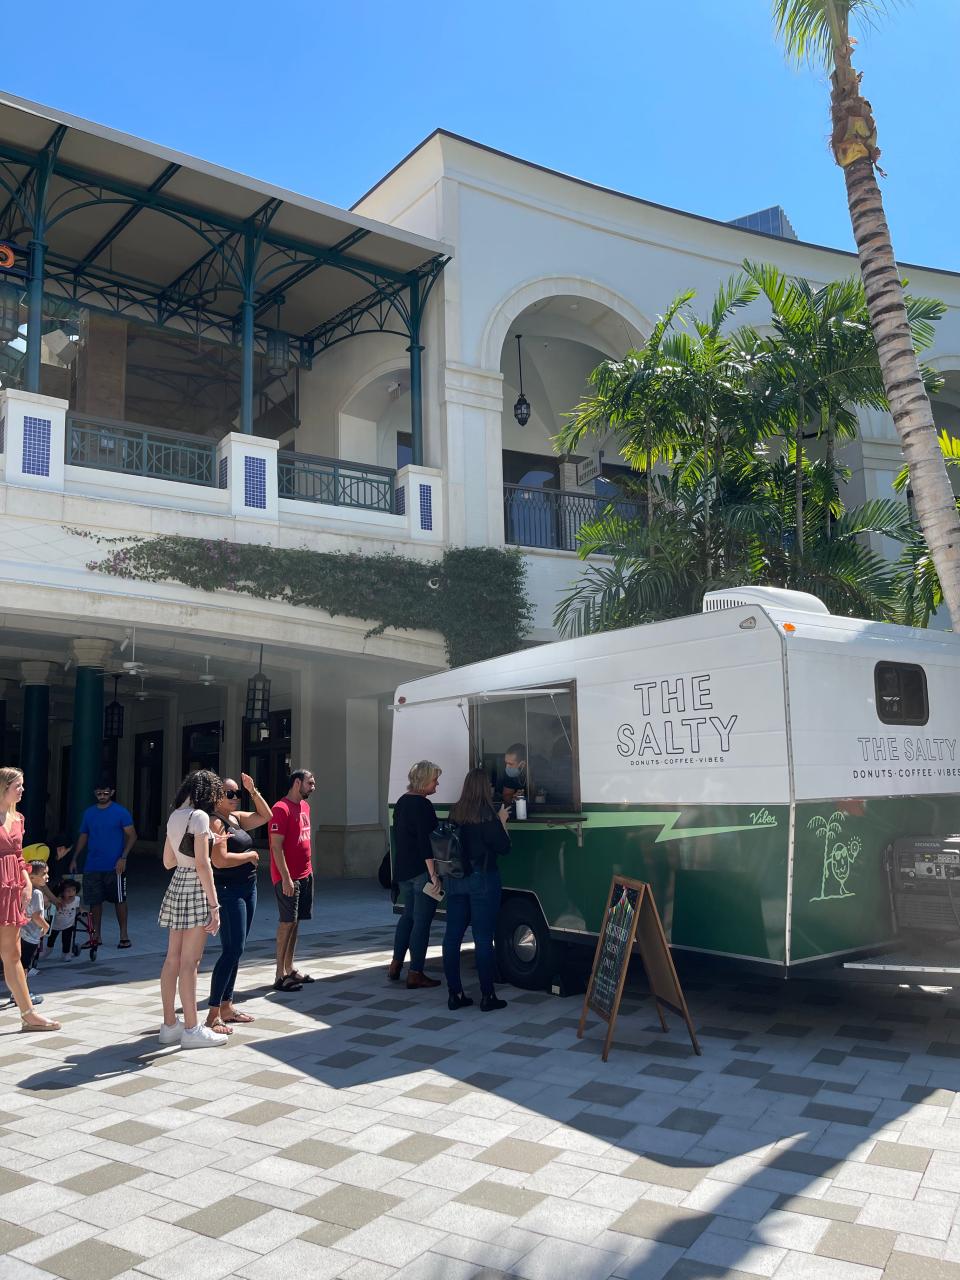 The Salty Donut had pop-up events at The Square in downtown West Palm Beach before opening a shop at the plaza in August 2022.